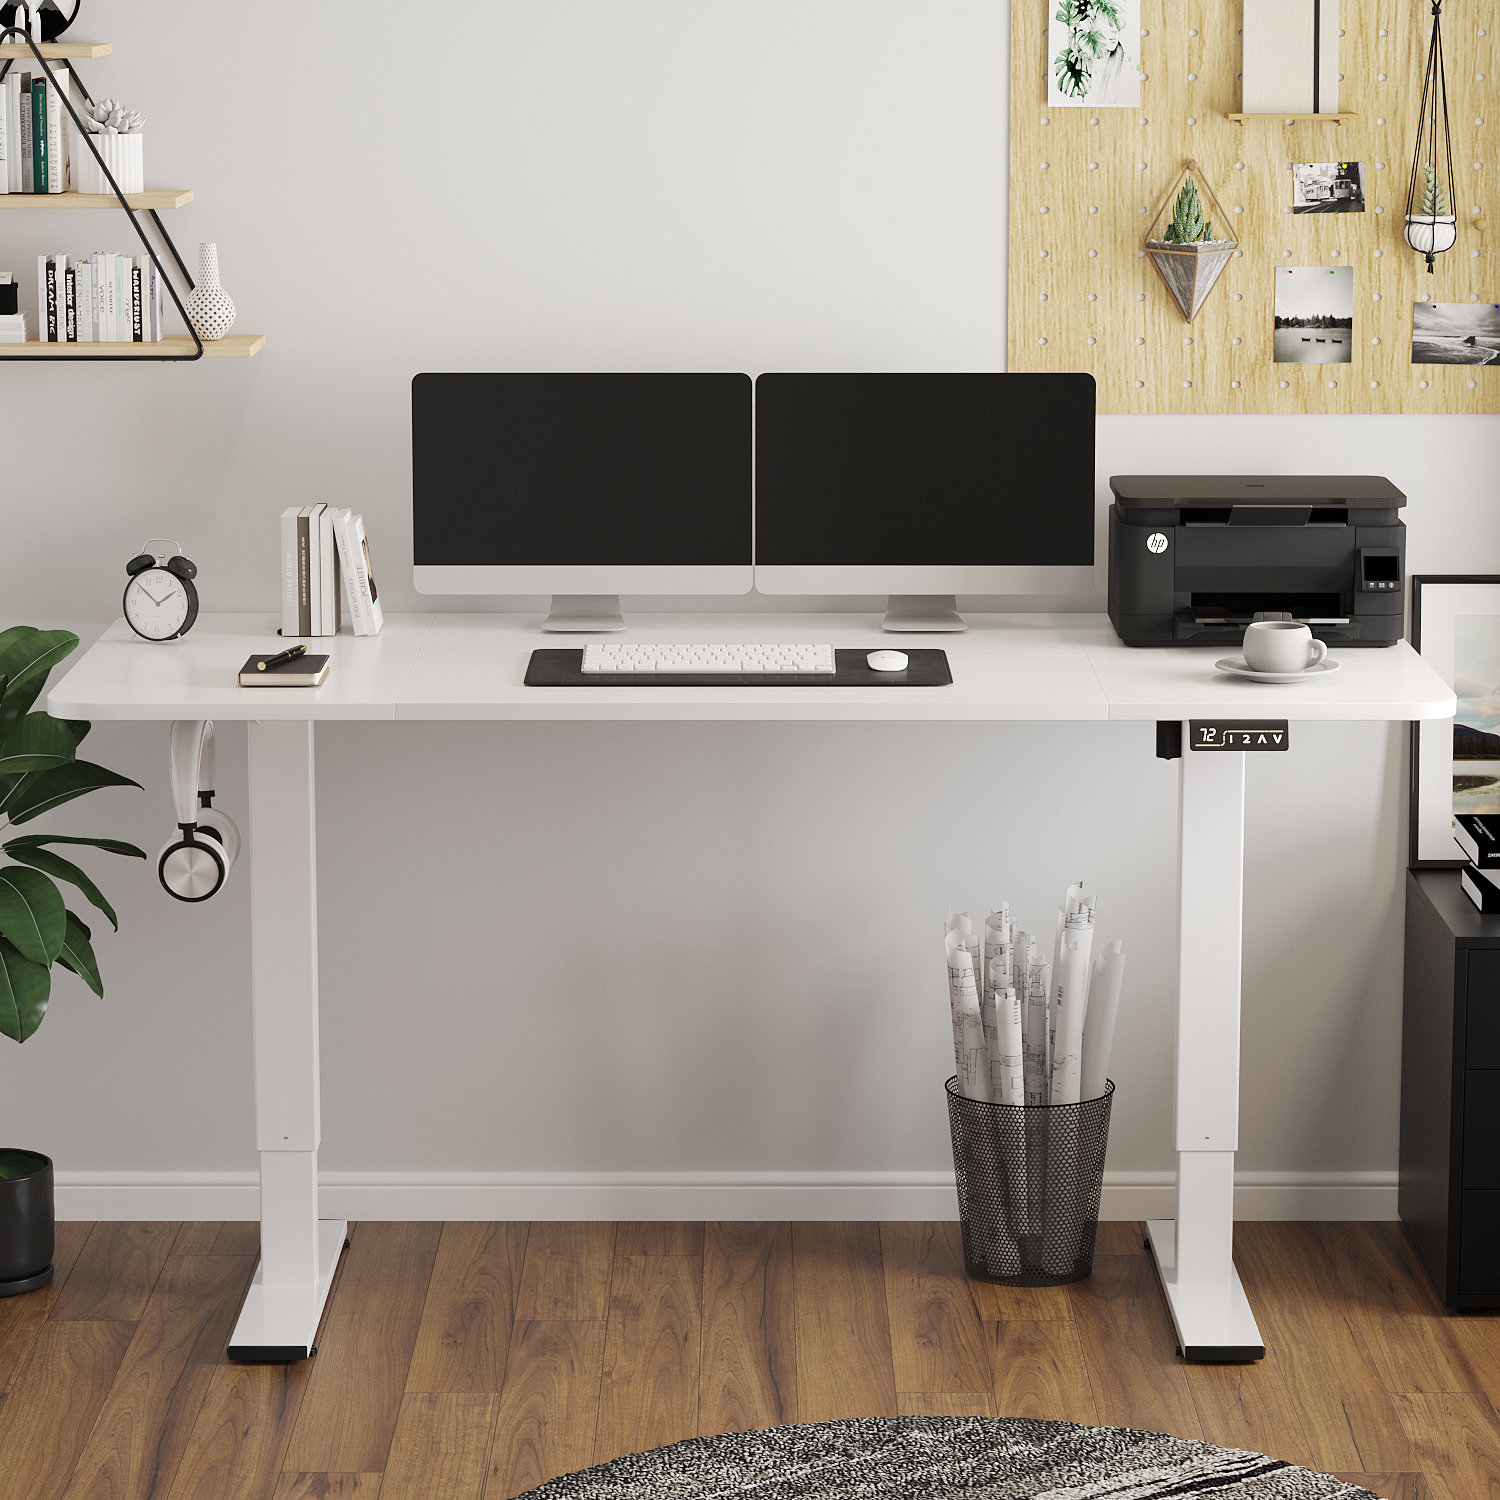 4 FlexiSpot Accessories to Make Your Office Space Highly Functional